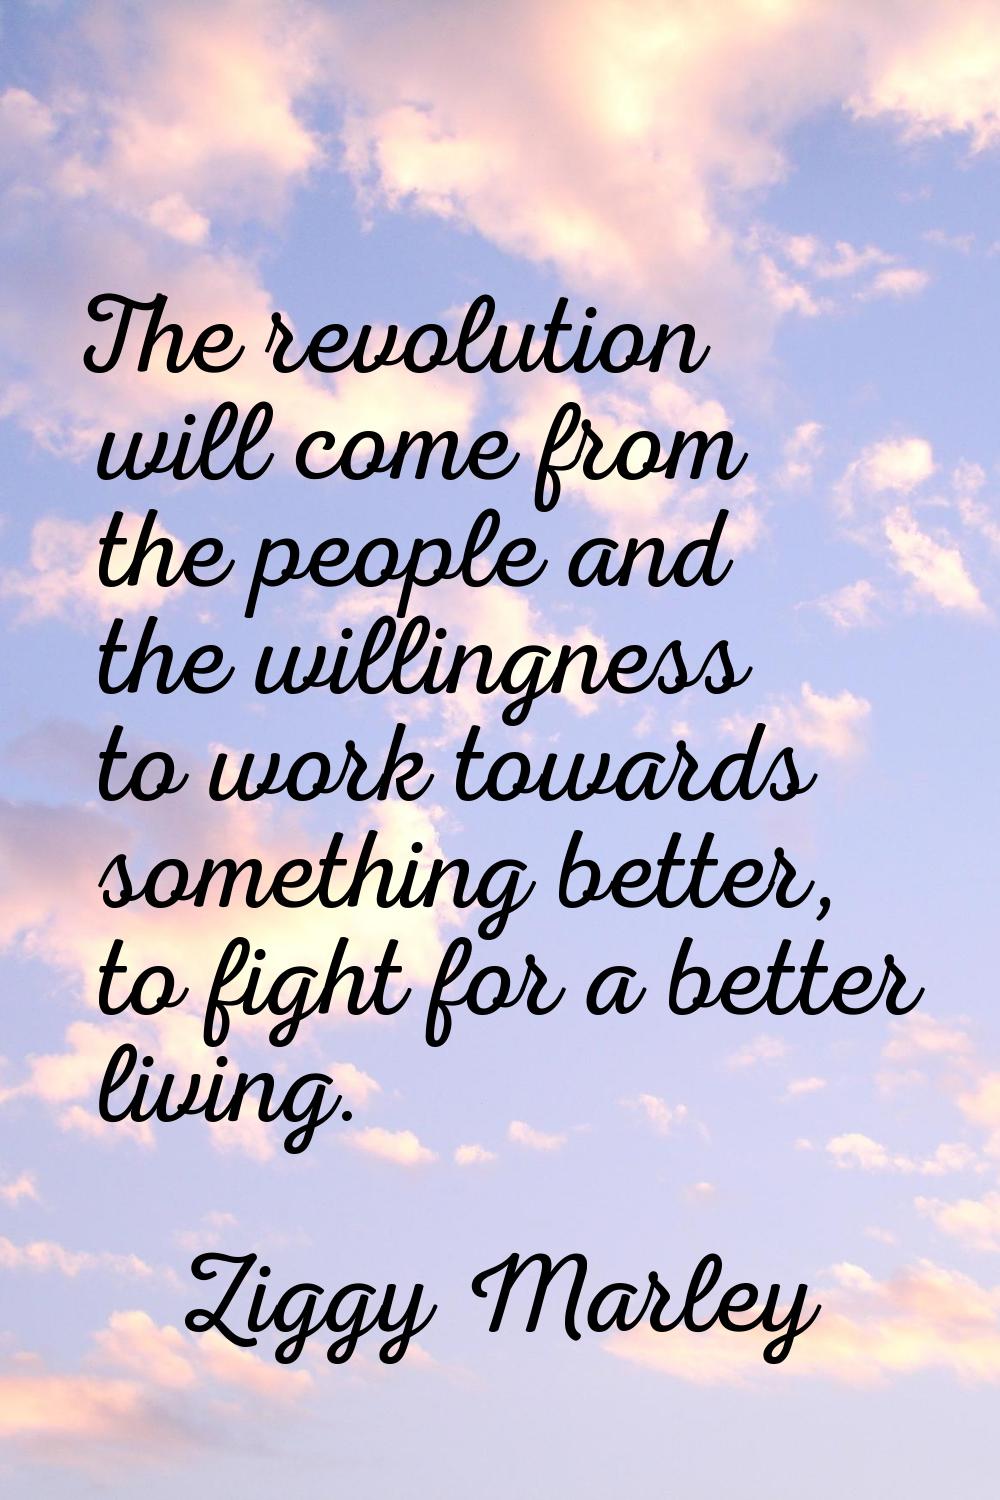 The revolution will come from the people and the willingness to work towards something better, to f